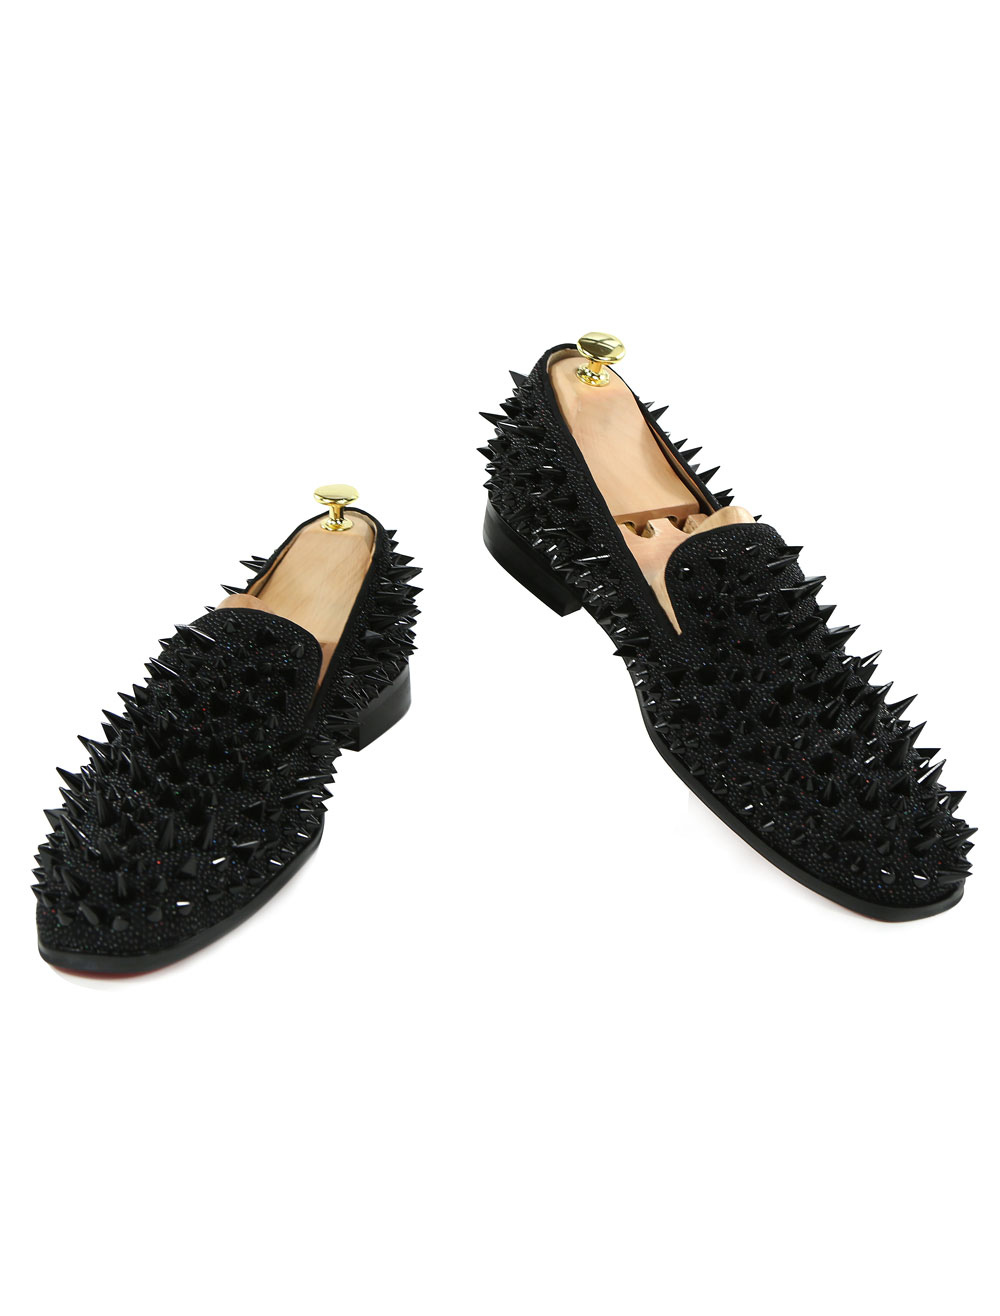 black loafers with spikes